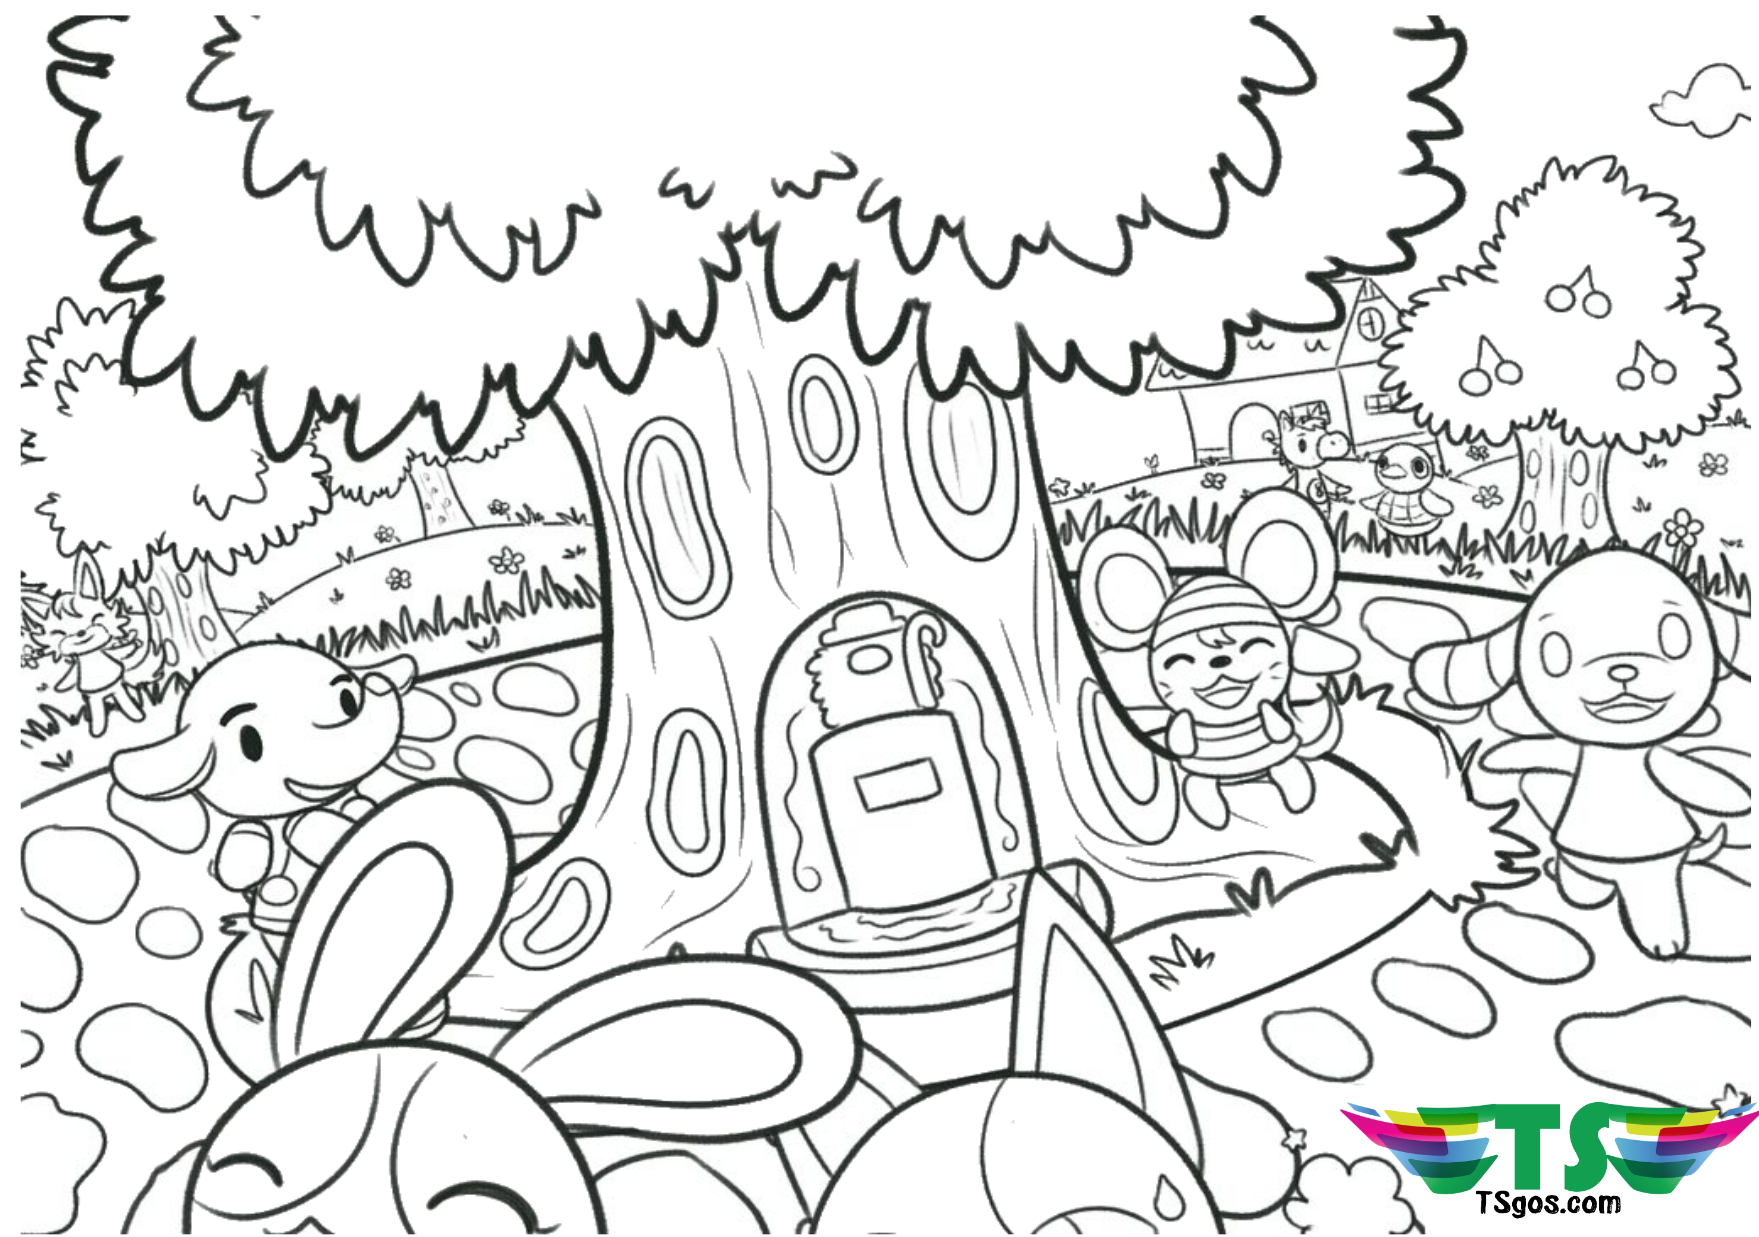 Animal crossing free download and printable coloring page